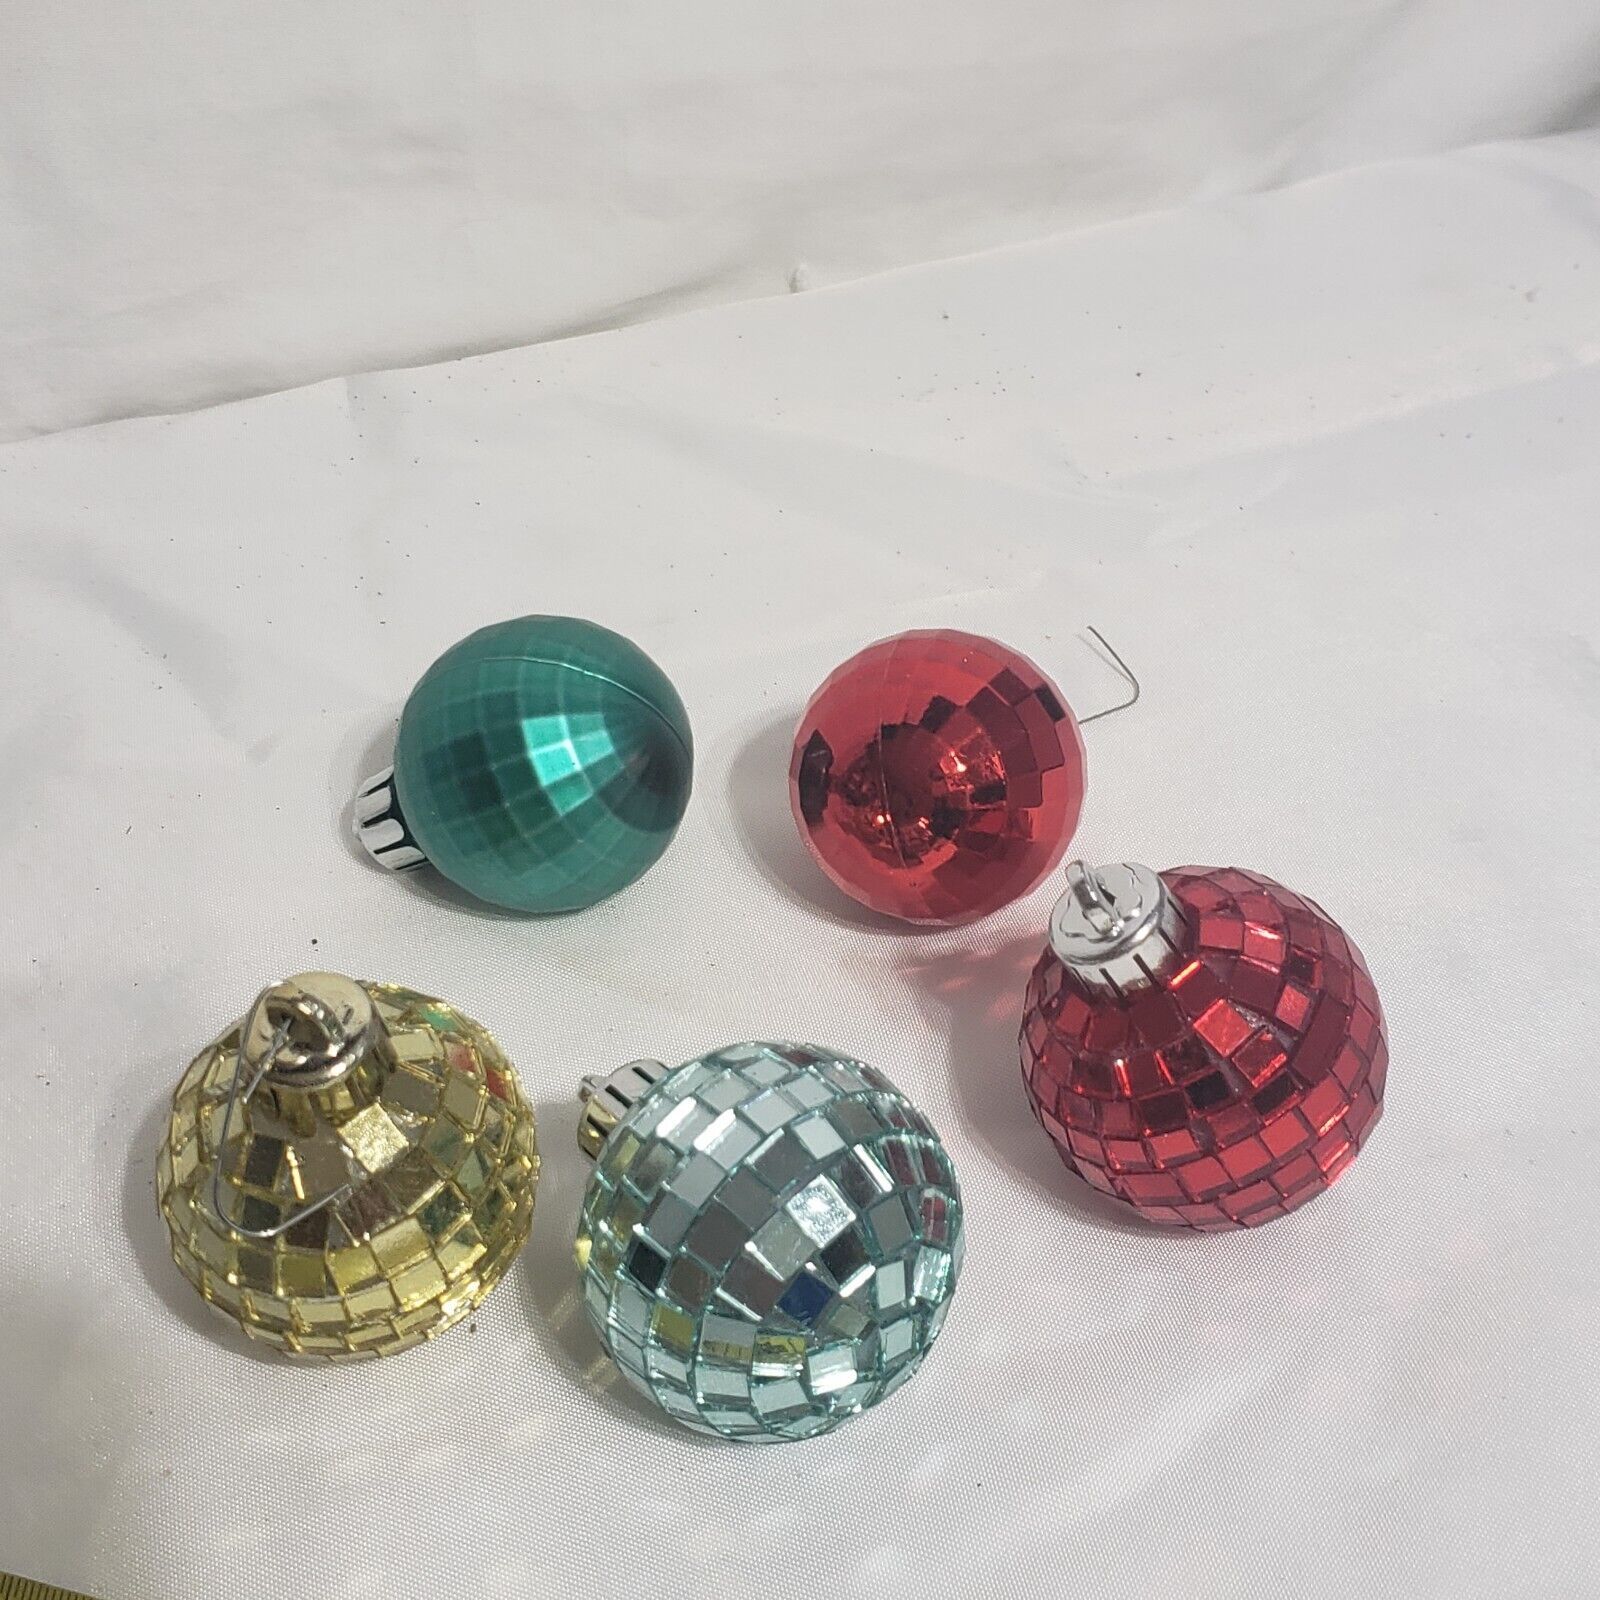 Primary image for Mirror Disco Ball Glass ornaments (3) round disco ball (2) Christmas ornaments